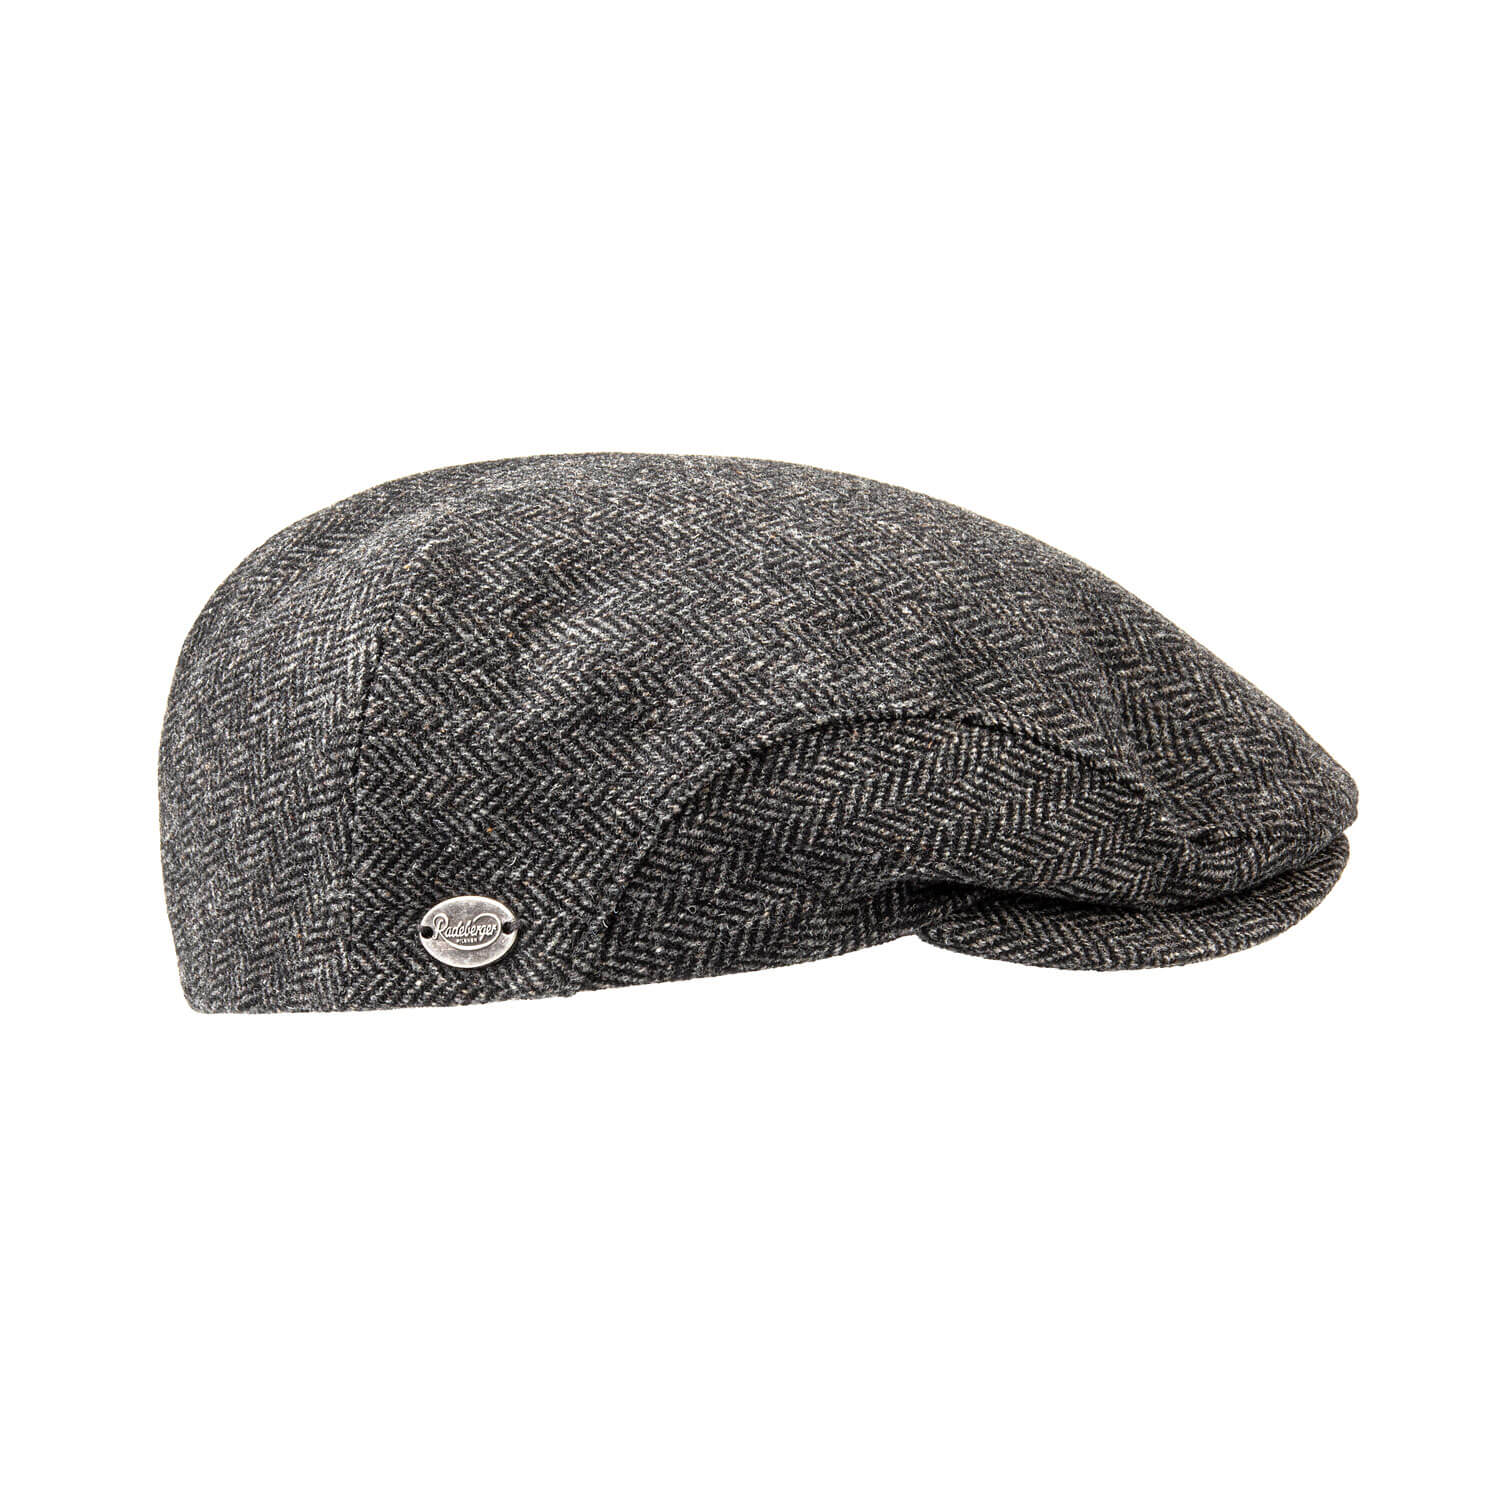 Radeberger Gatsby-Cap "New Collection", Gr. S/M